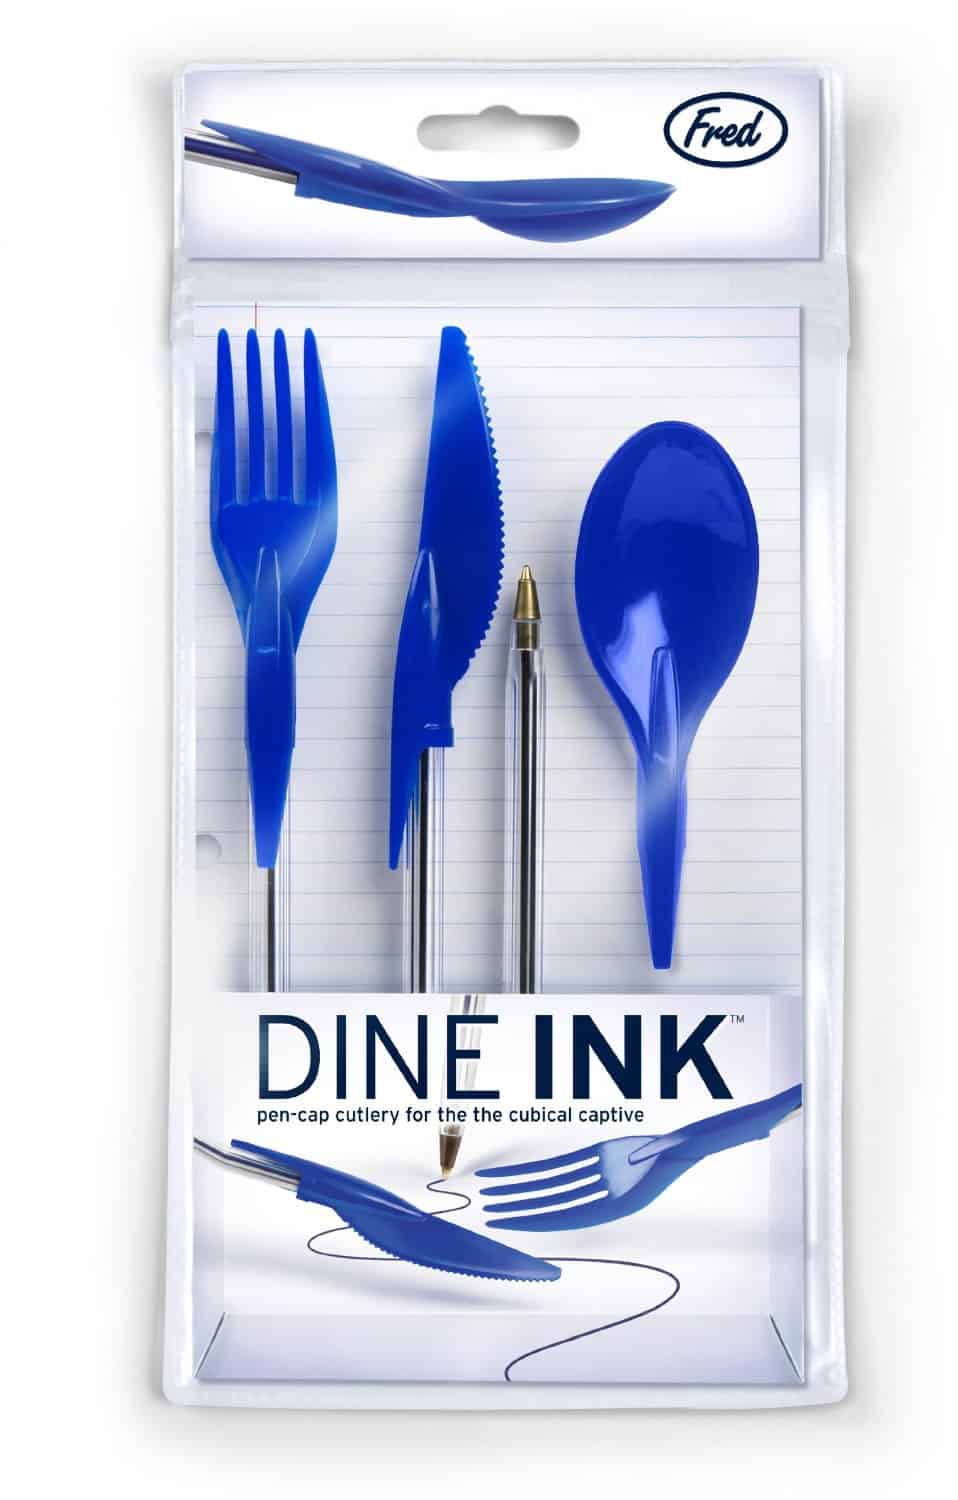 Dine Ink Pen Cap Eating Utensils Eating on the Go Must Have Accessory Blue Plastic